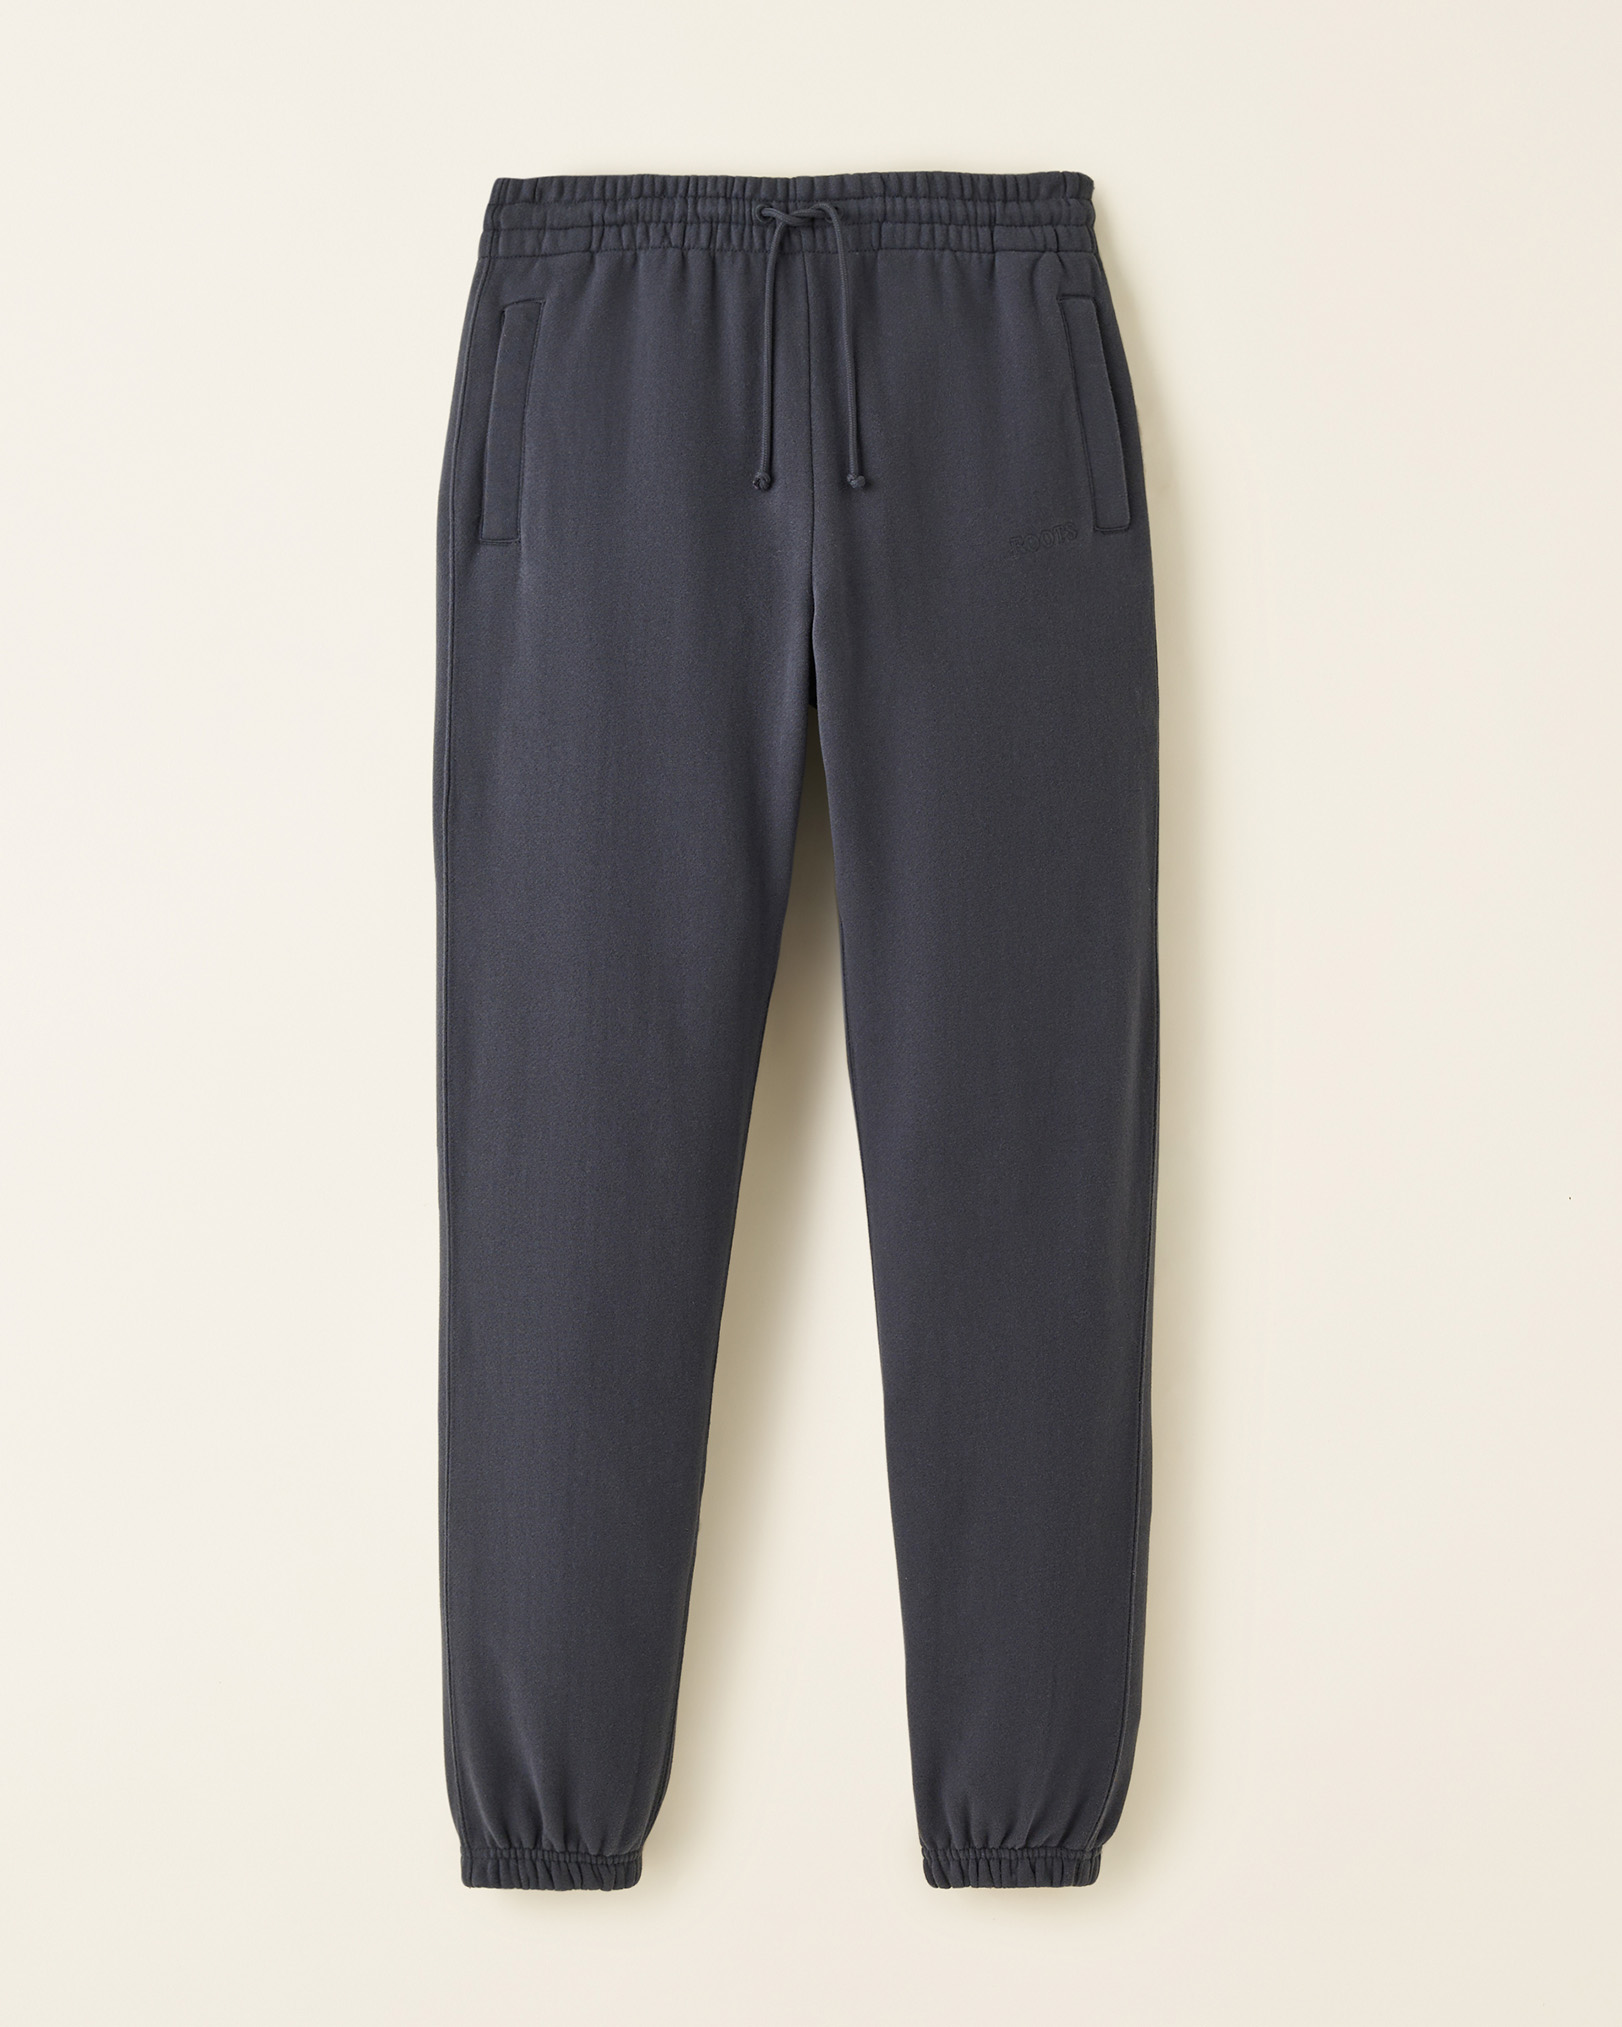 Roots One Sweatpant in Graphite